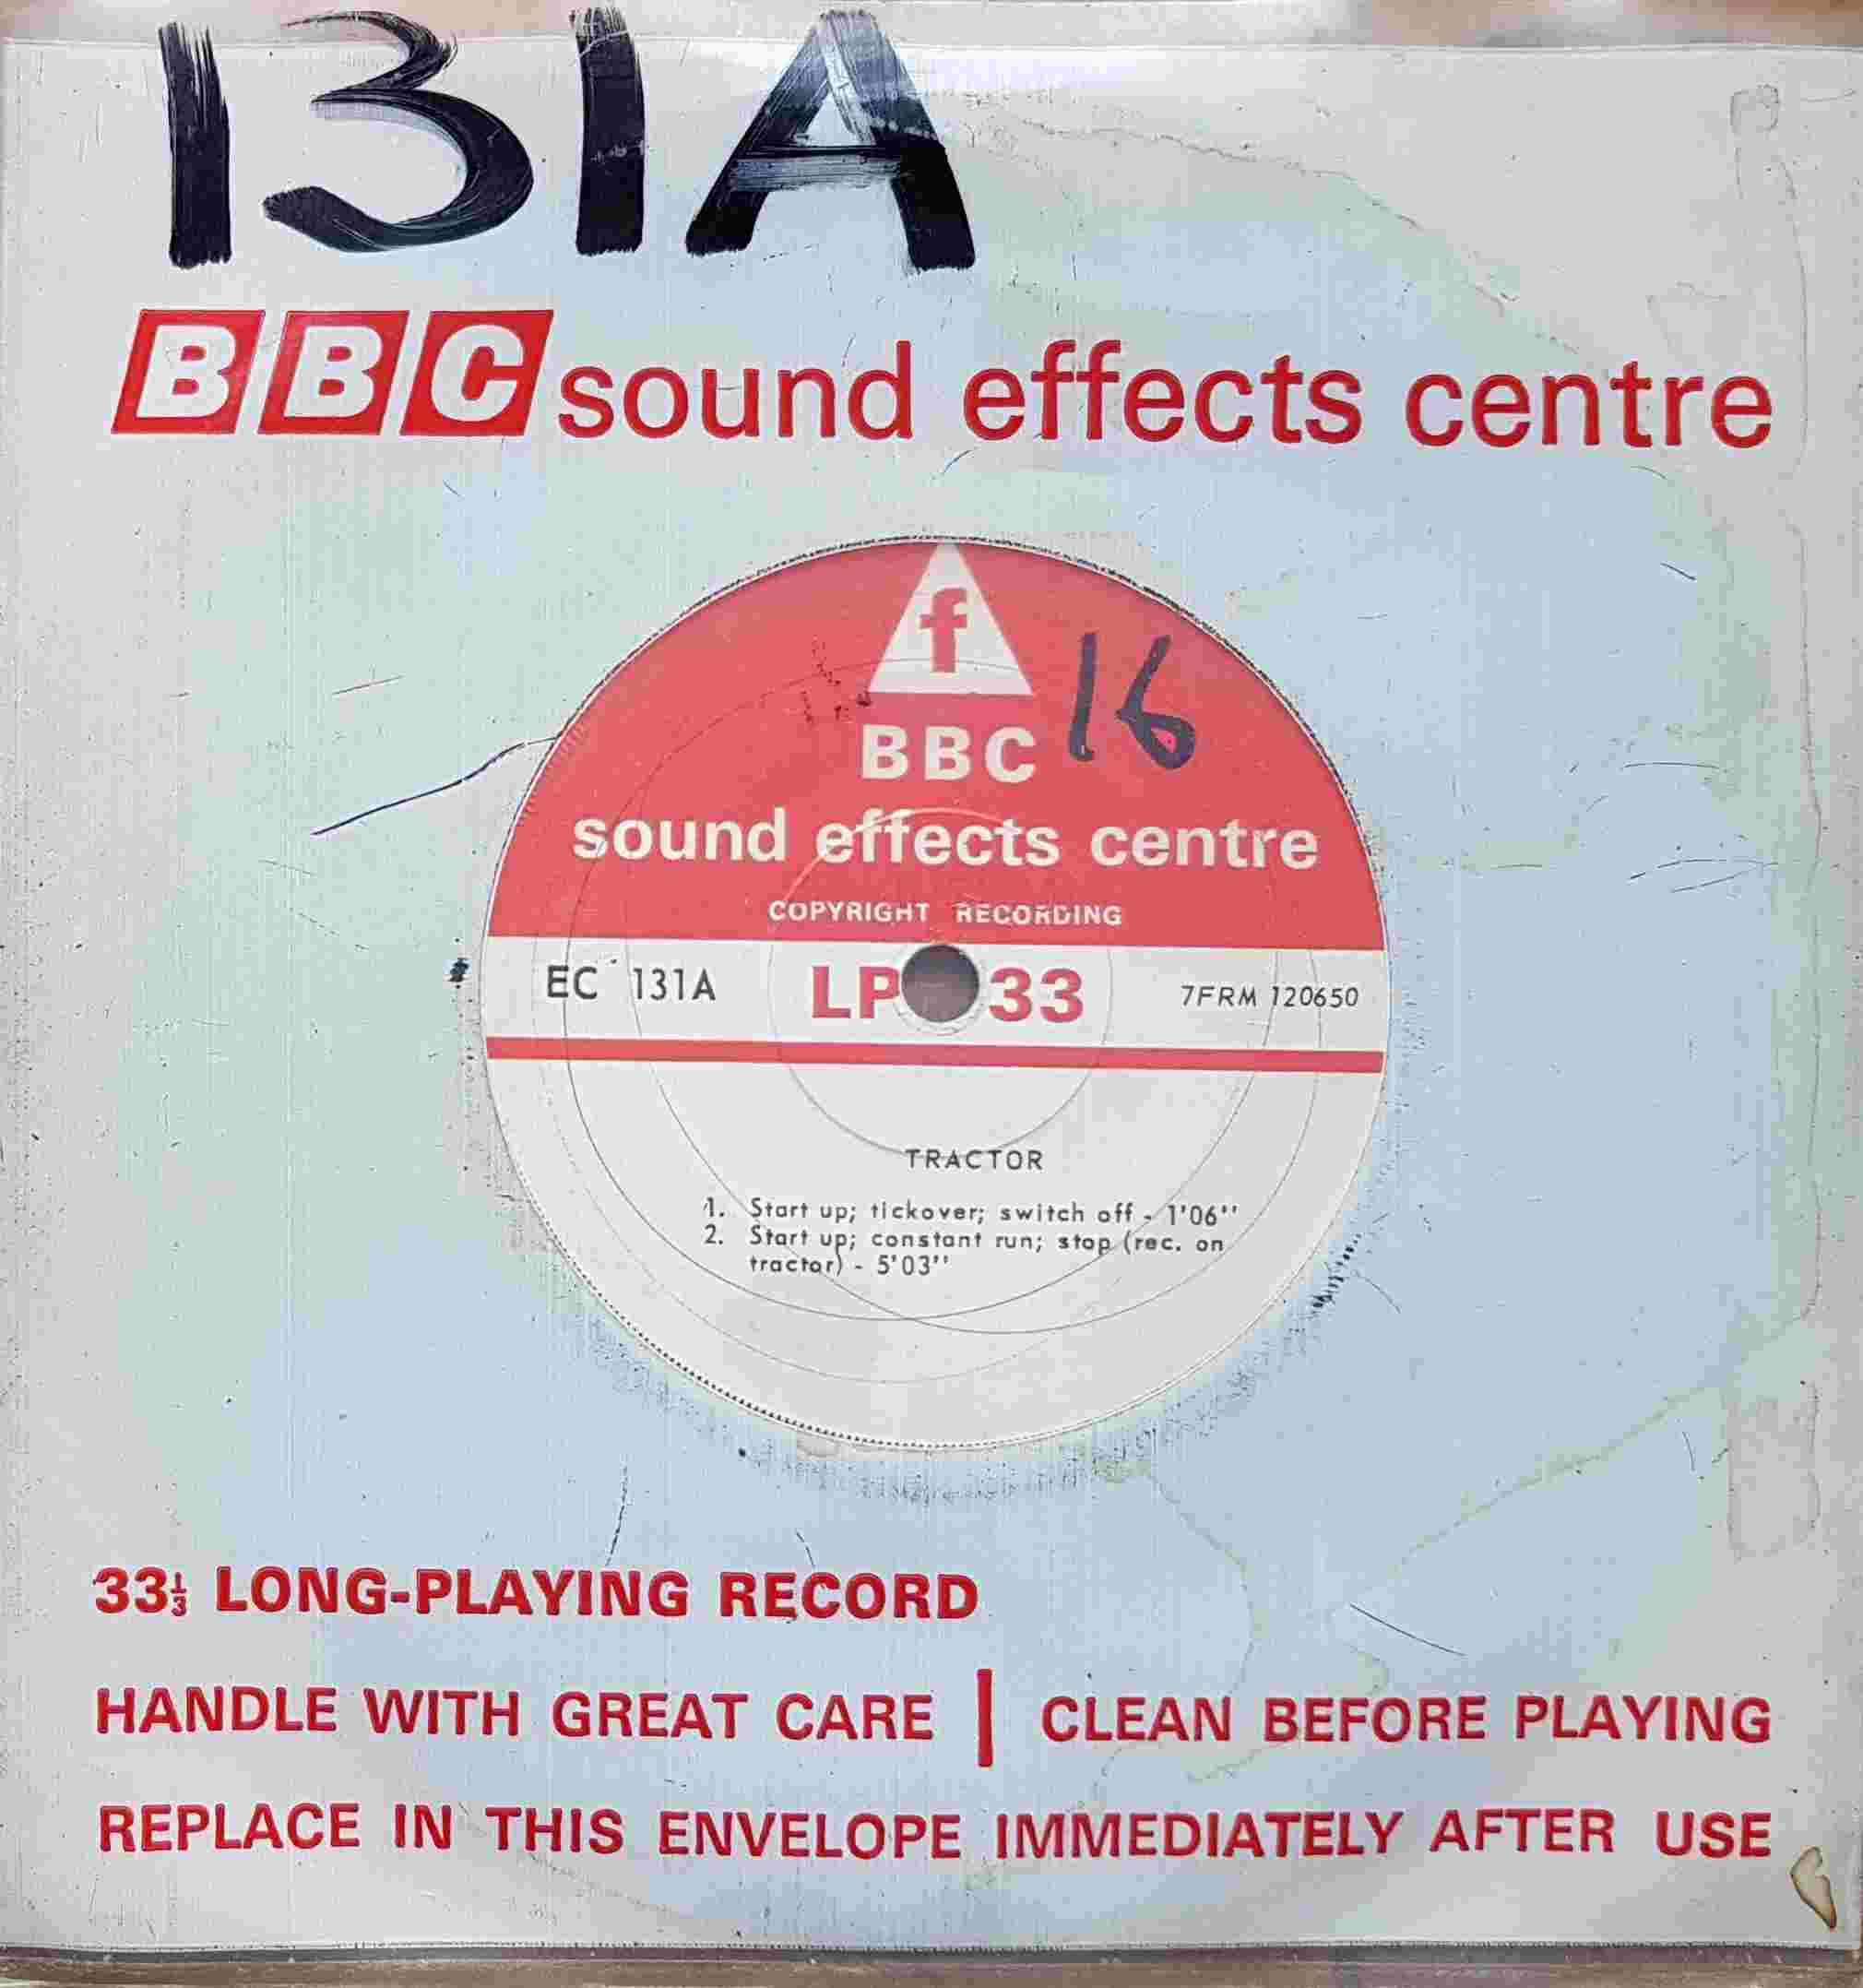 Picture of EC 131A Tractor by artist Not registered from the BBC singles - Records and Tapes library